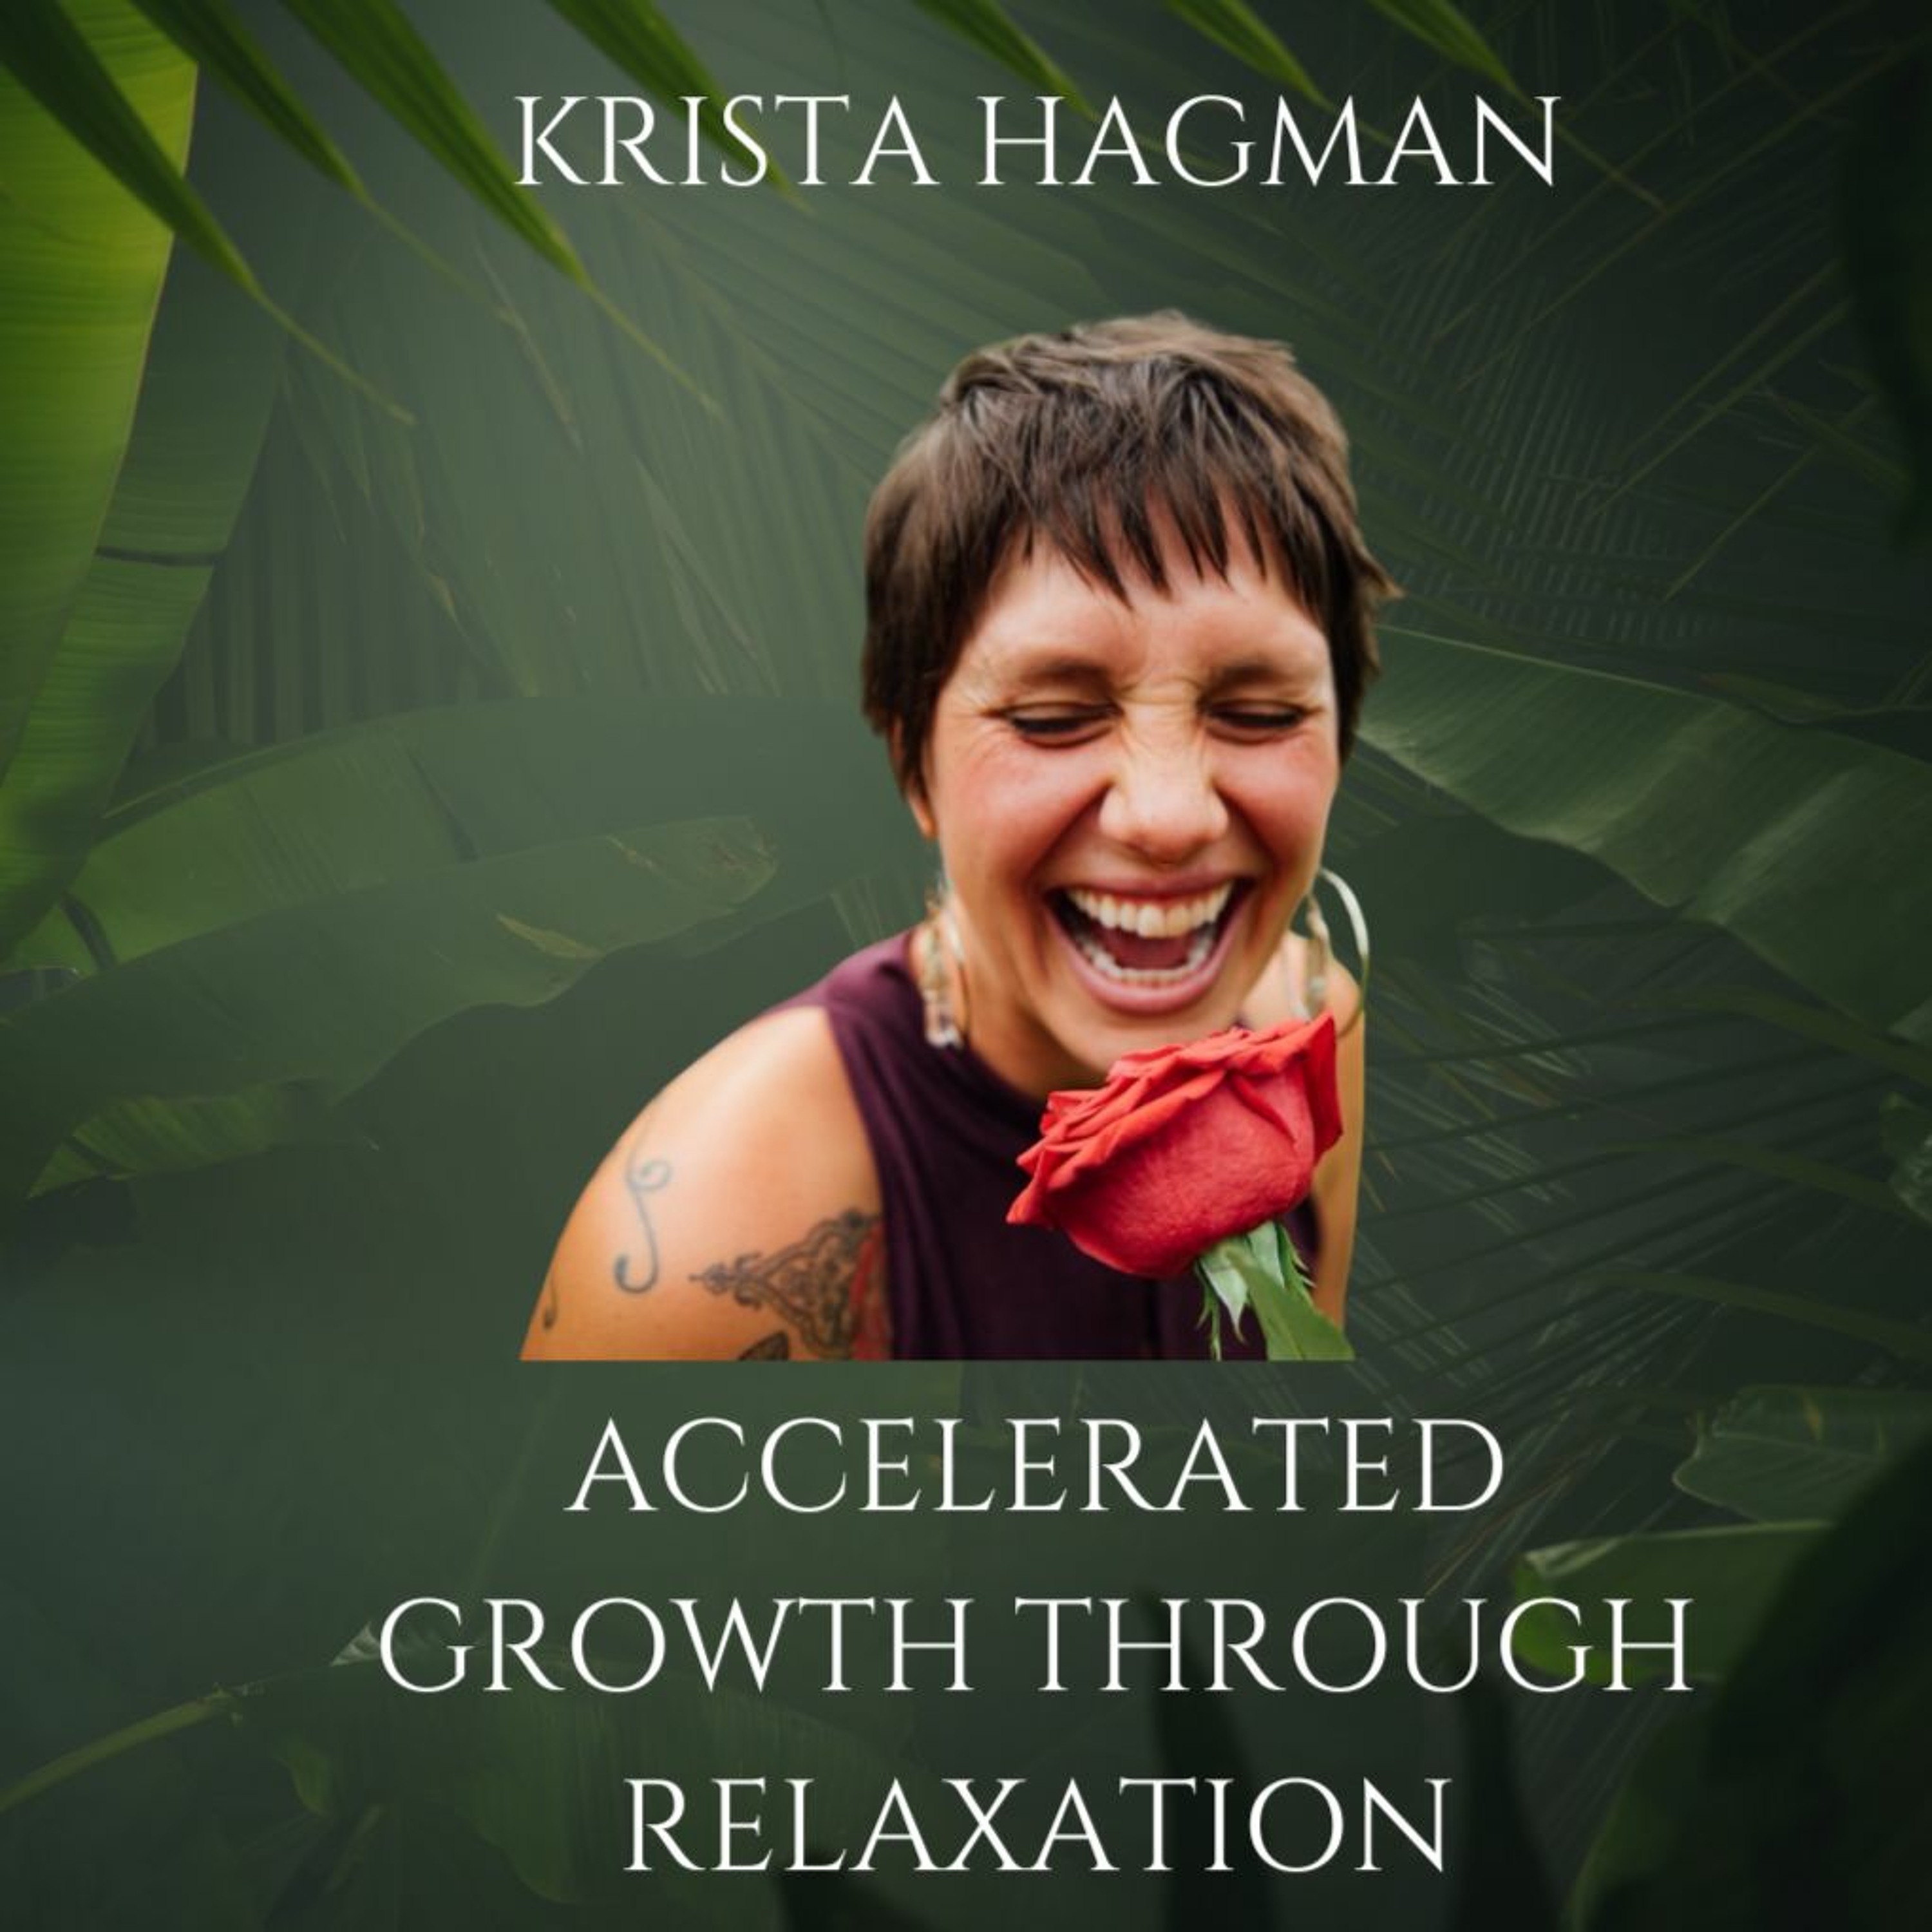 Accllerated Growth Through Relaxation- Krista Hagman